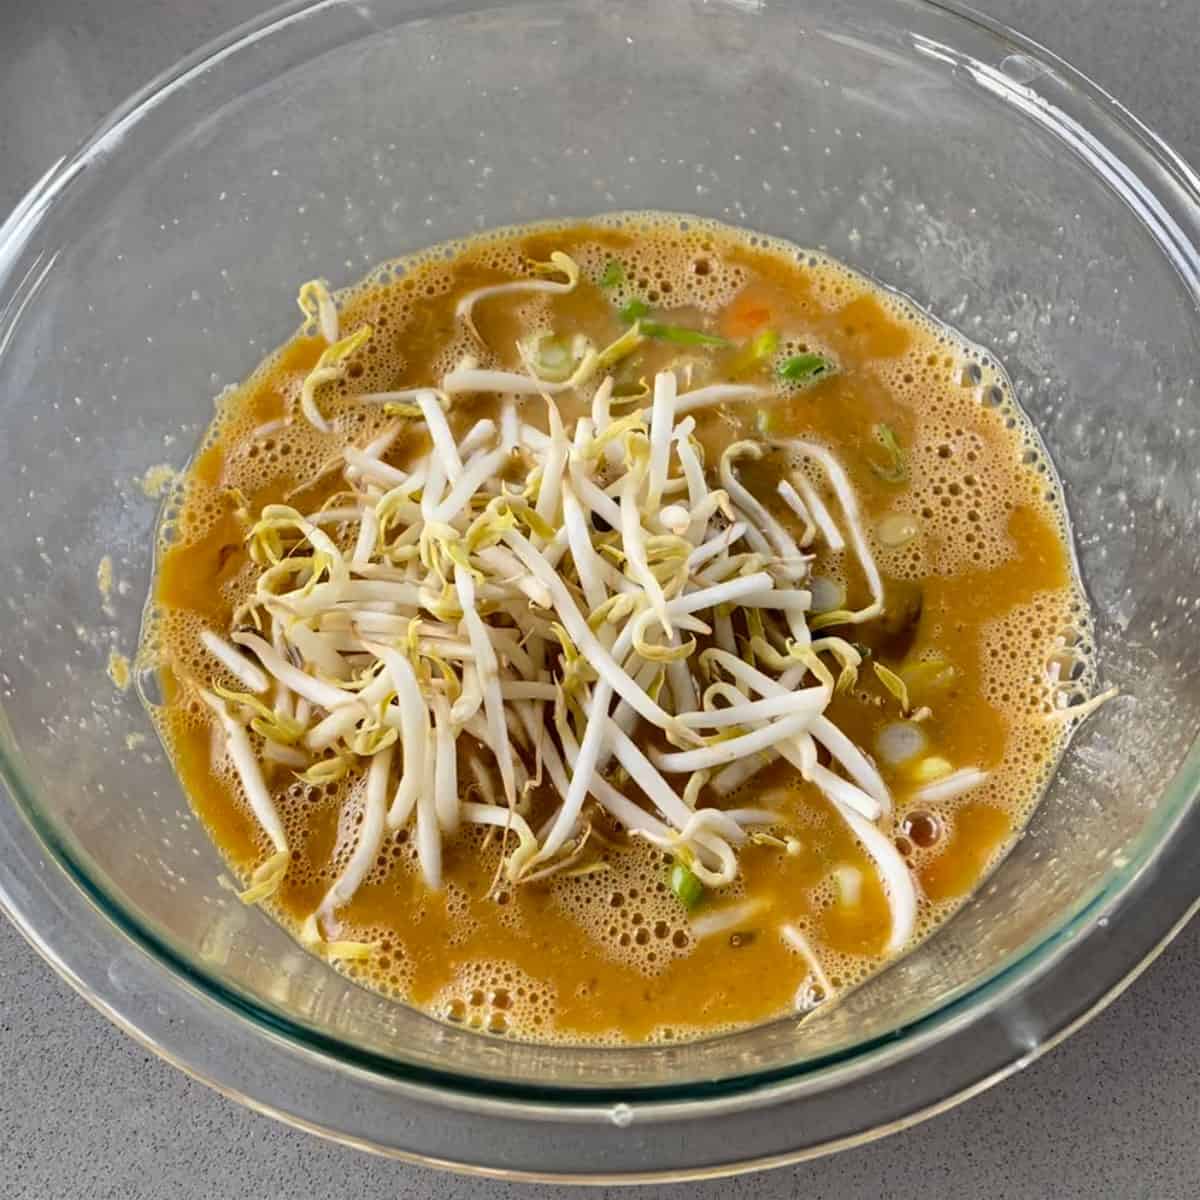 Eggs, spices and bean sprouts in a glass bowl